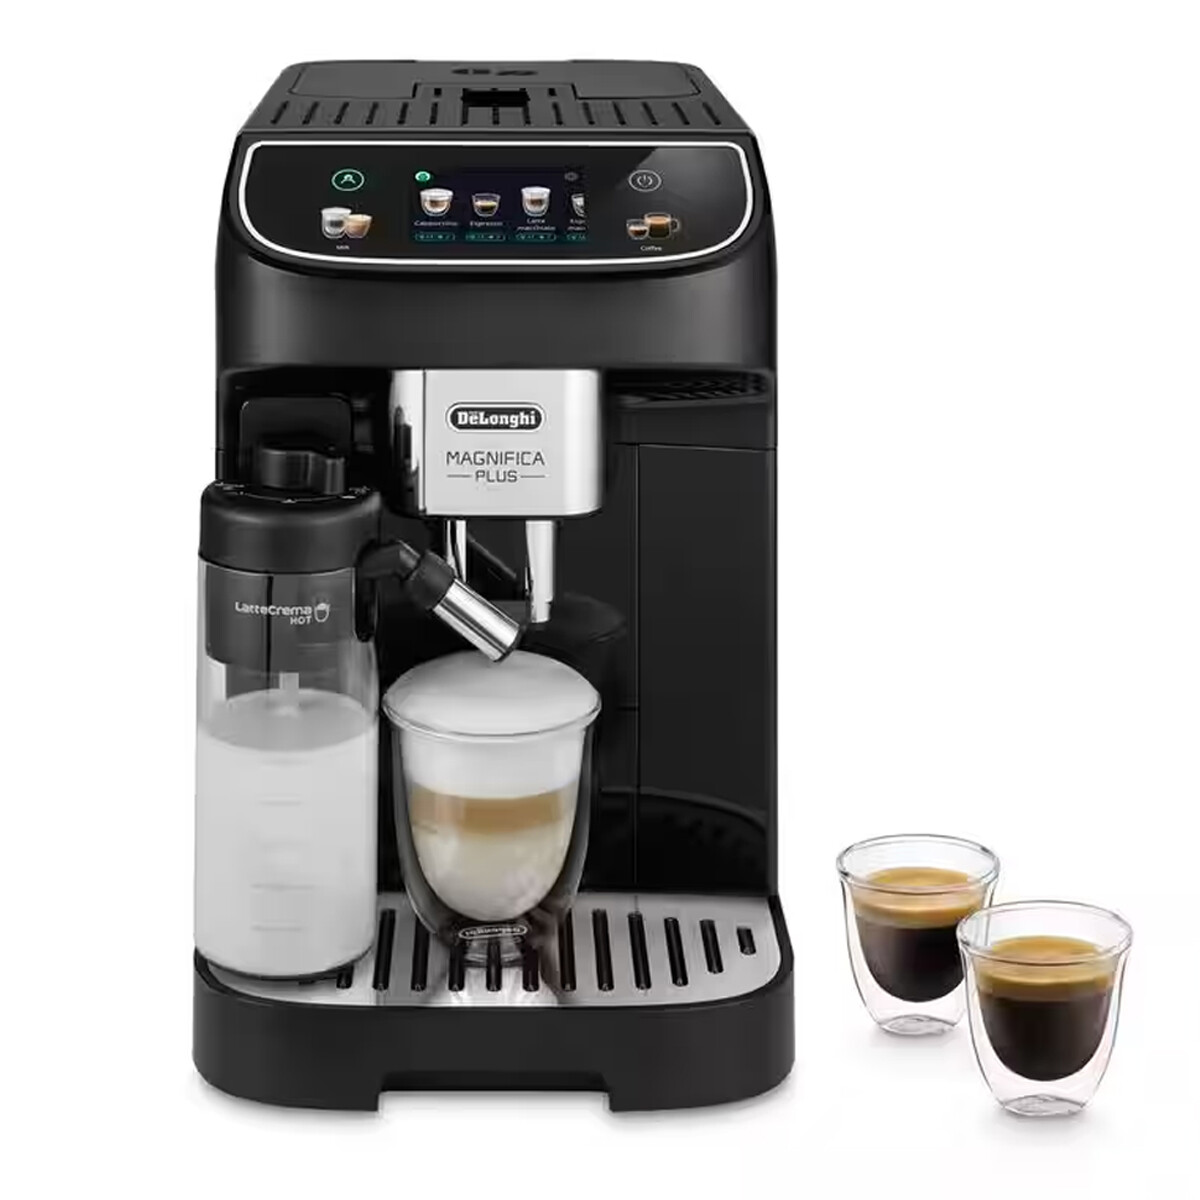 Cafetera Delonghi Magnifica Plus Full-touch - NEGRO 